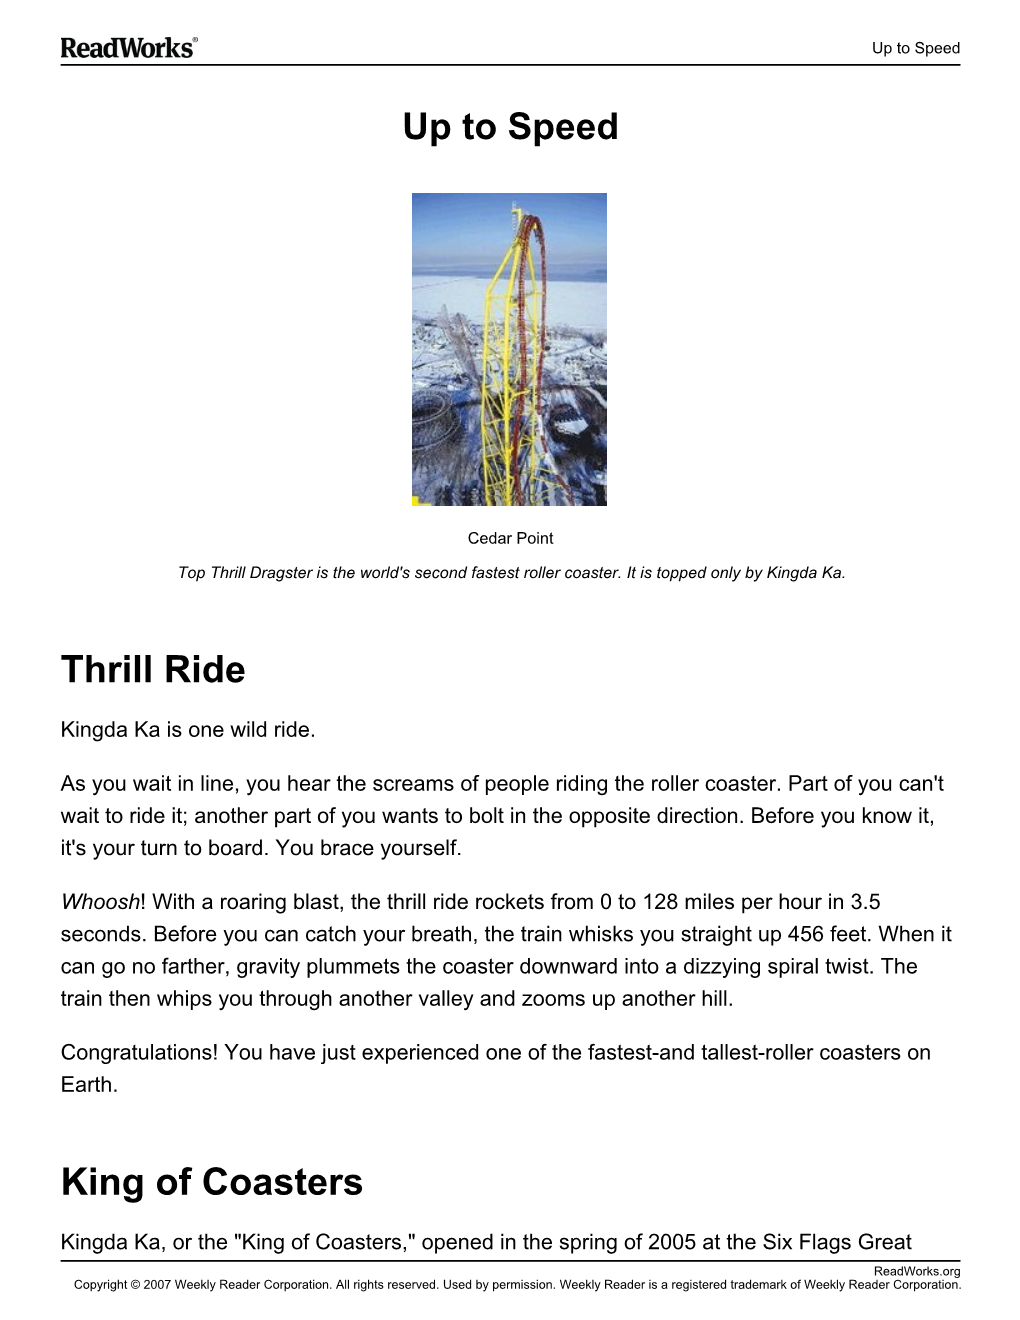 Thrill Ride King of Coasters